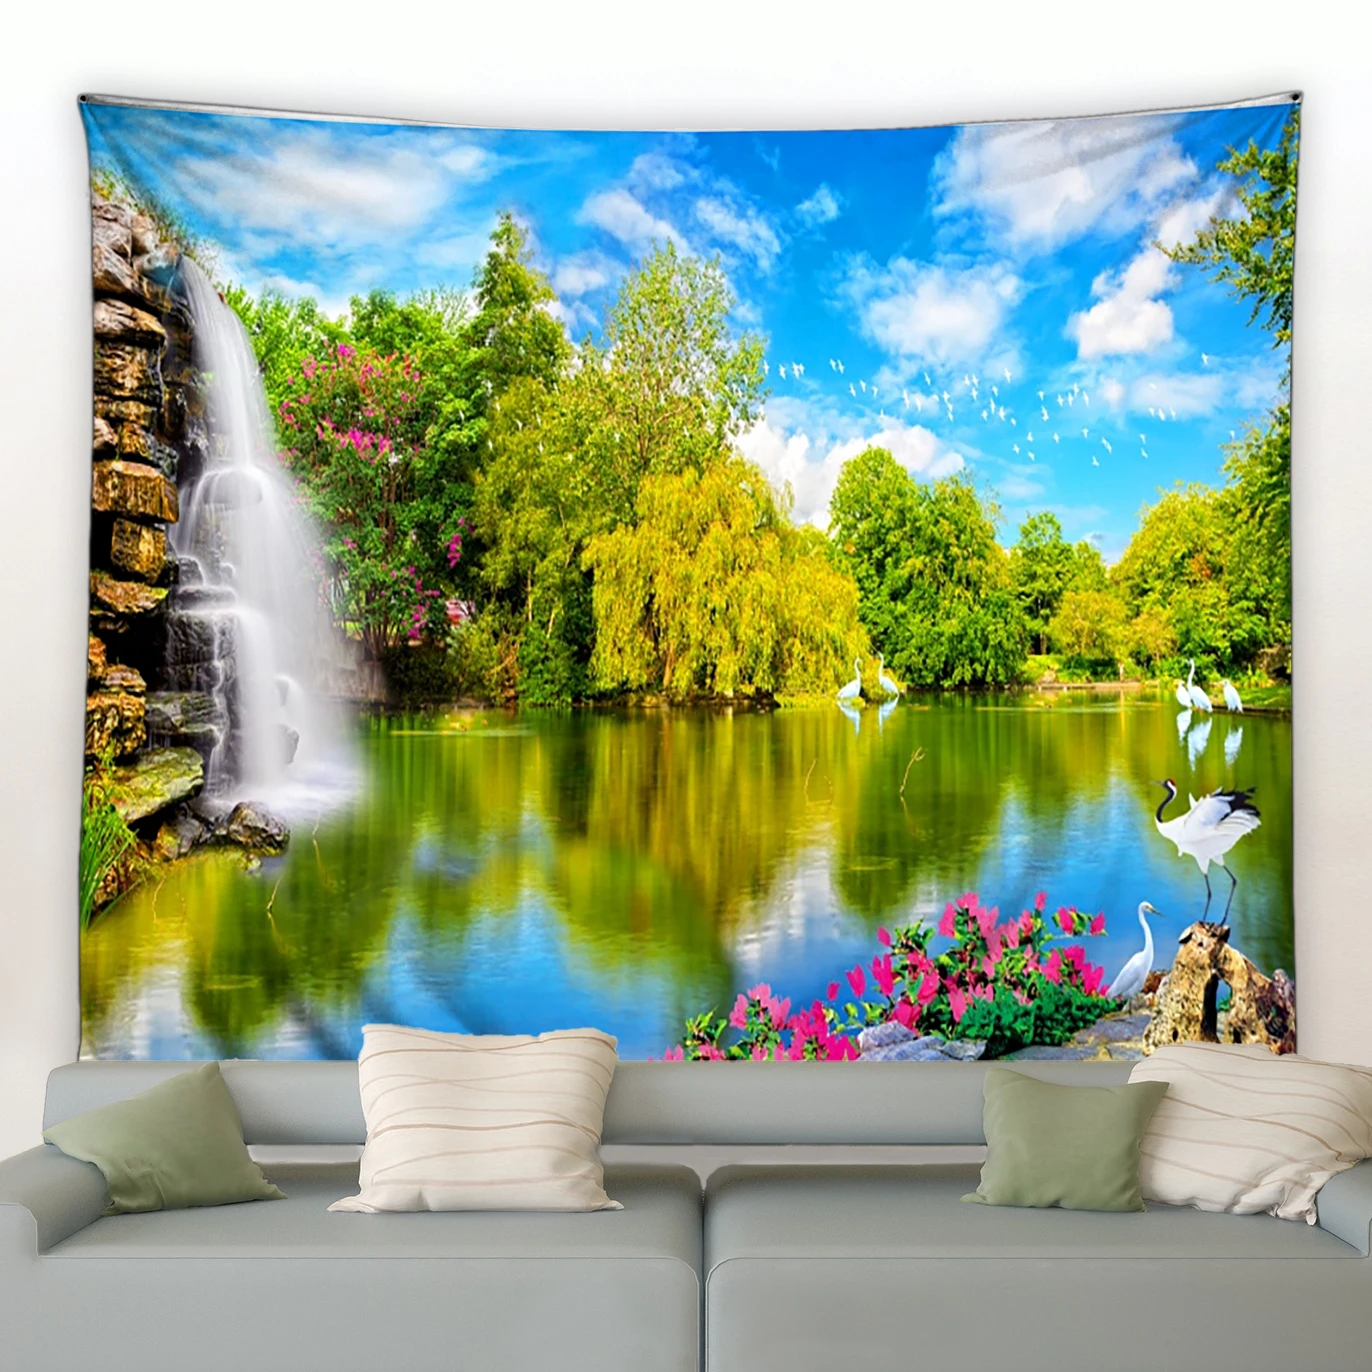 

Natural Forest Waterfall Landscape Tapestry Psychedelic Mandala Home Art Decorative Tapestry Hippie Bohemian Yoga Mattress Sheet